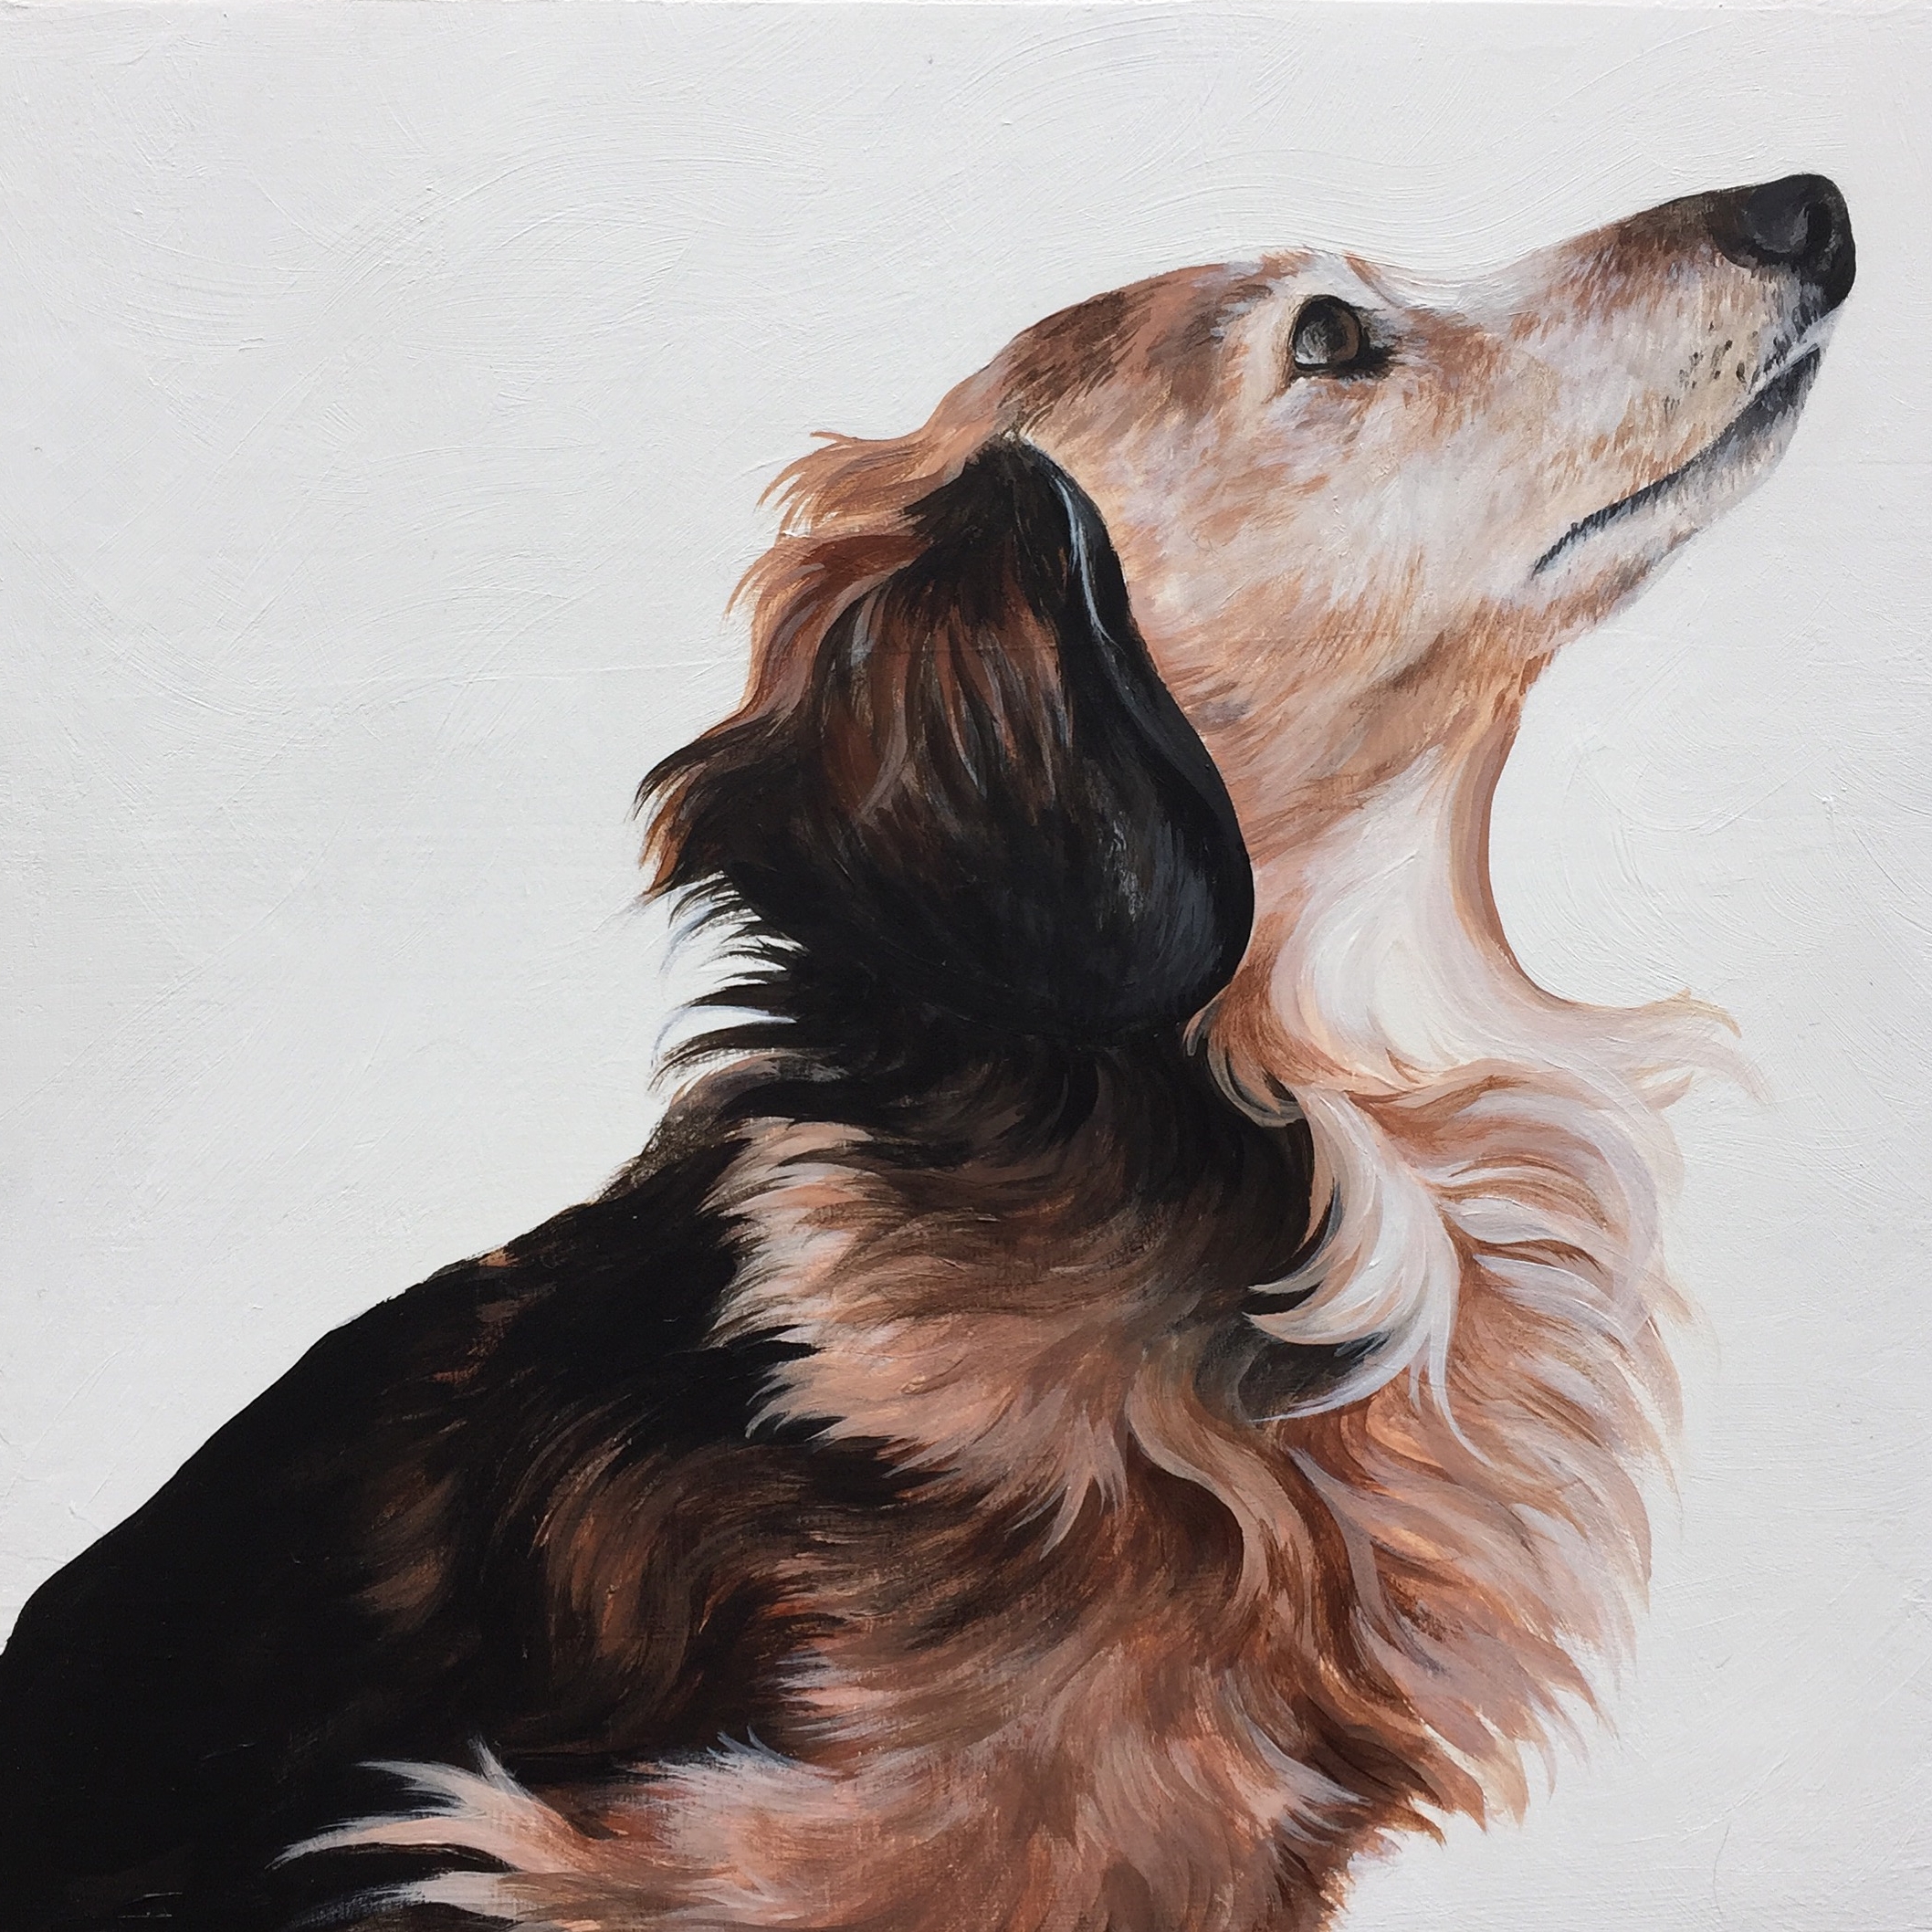  Rocky, commissioned by Julie Daxon. 